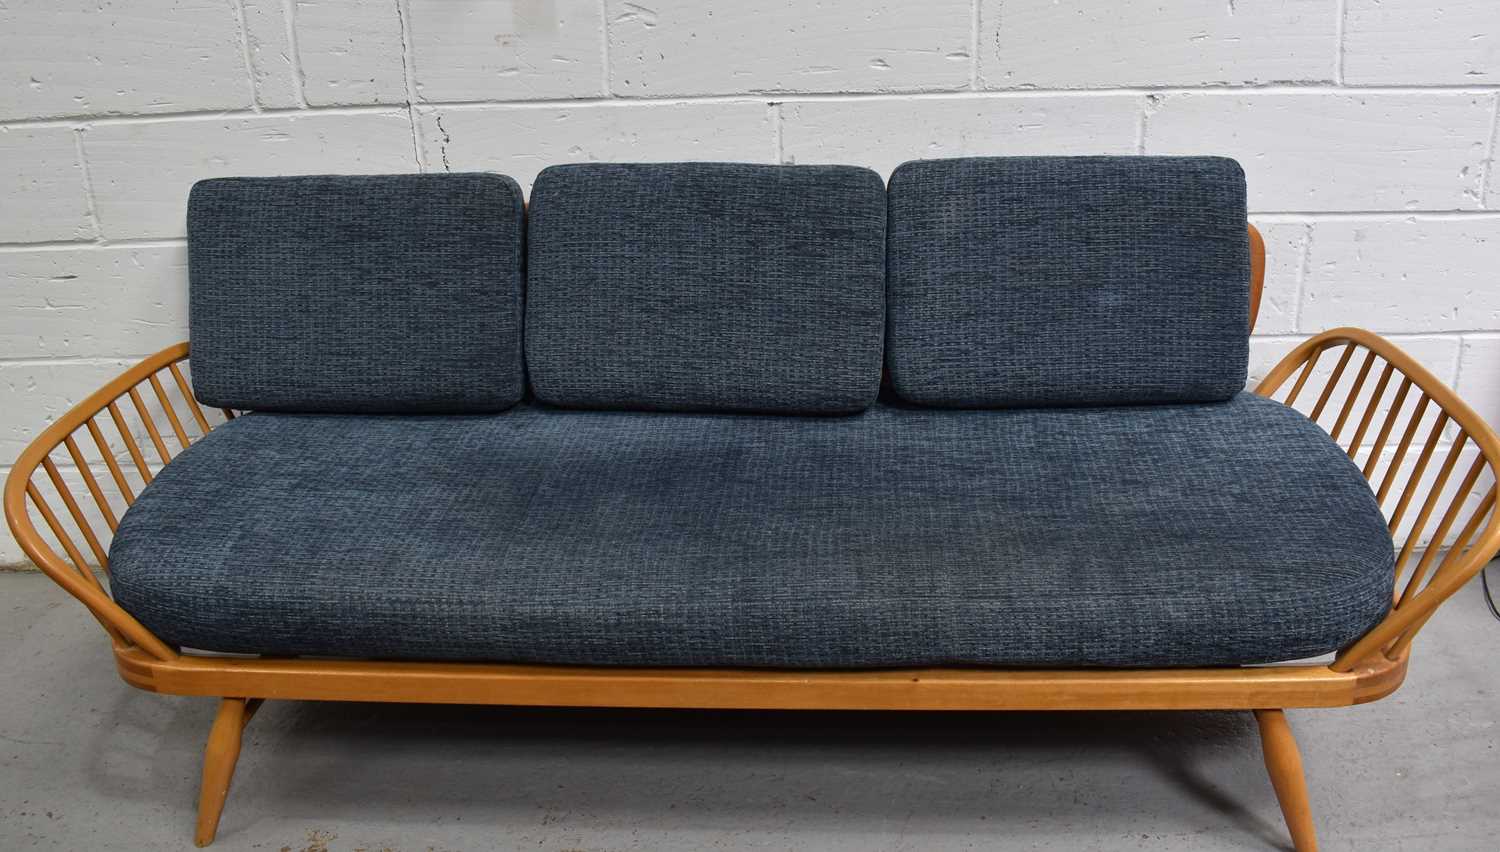 A Mid-Century Ercol elm and beech studio couch / daybed, model 355, designed by Lucian Ercolani. - Image 2 of 2